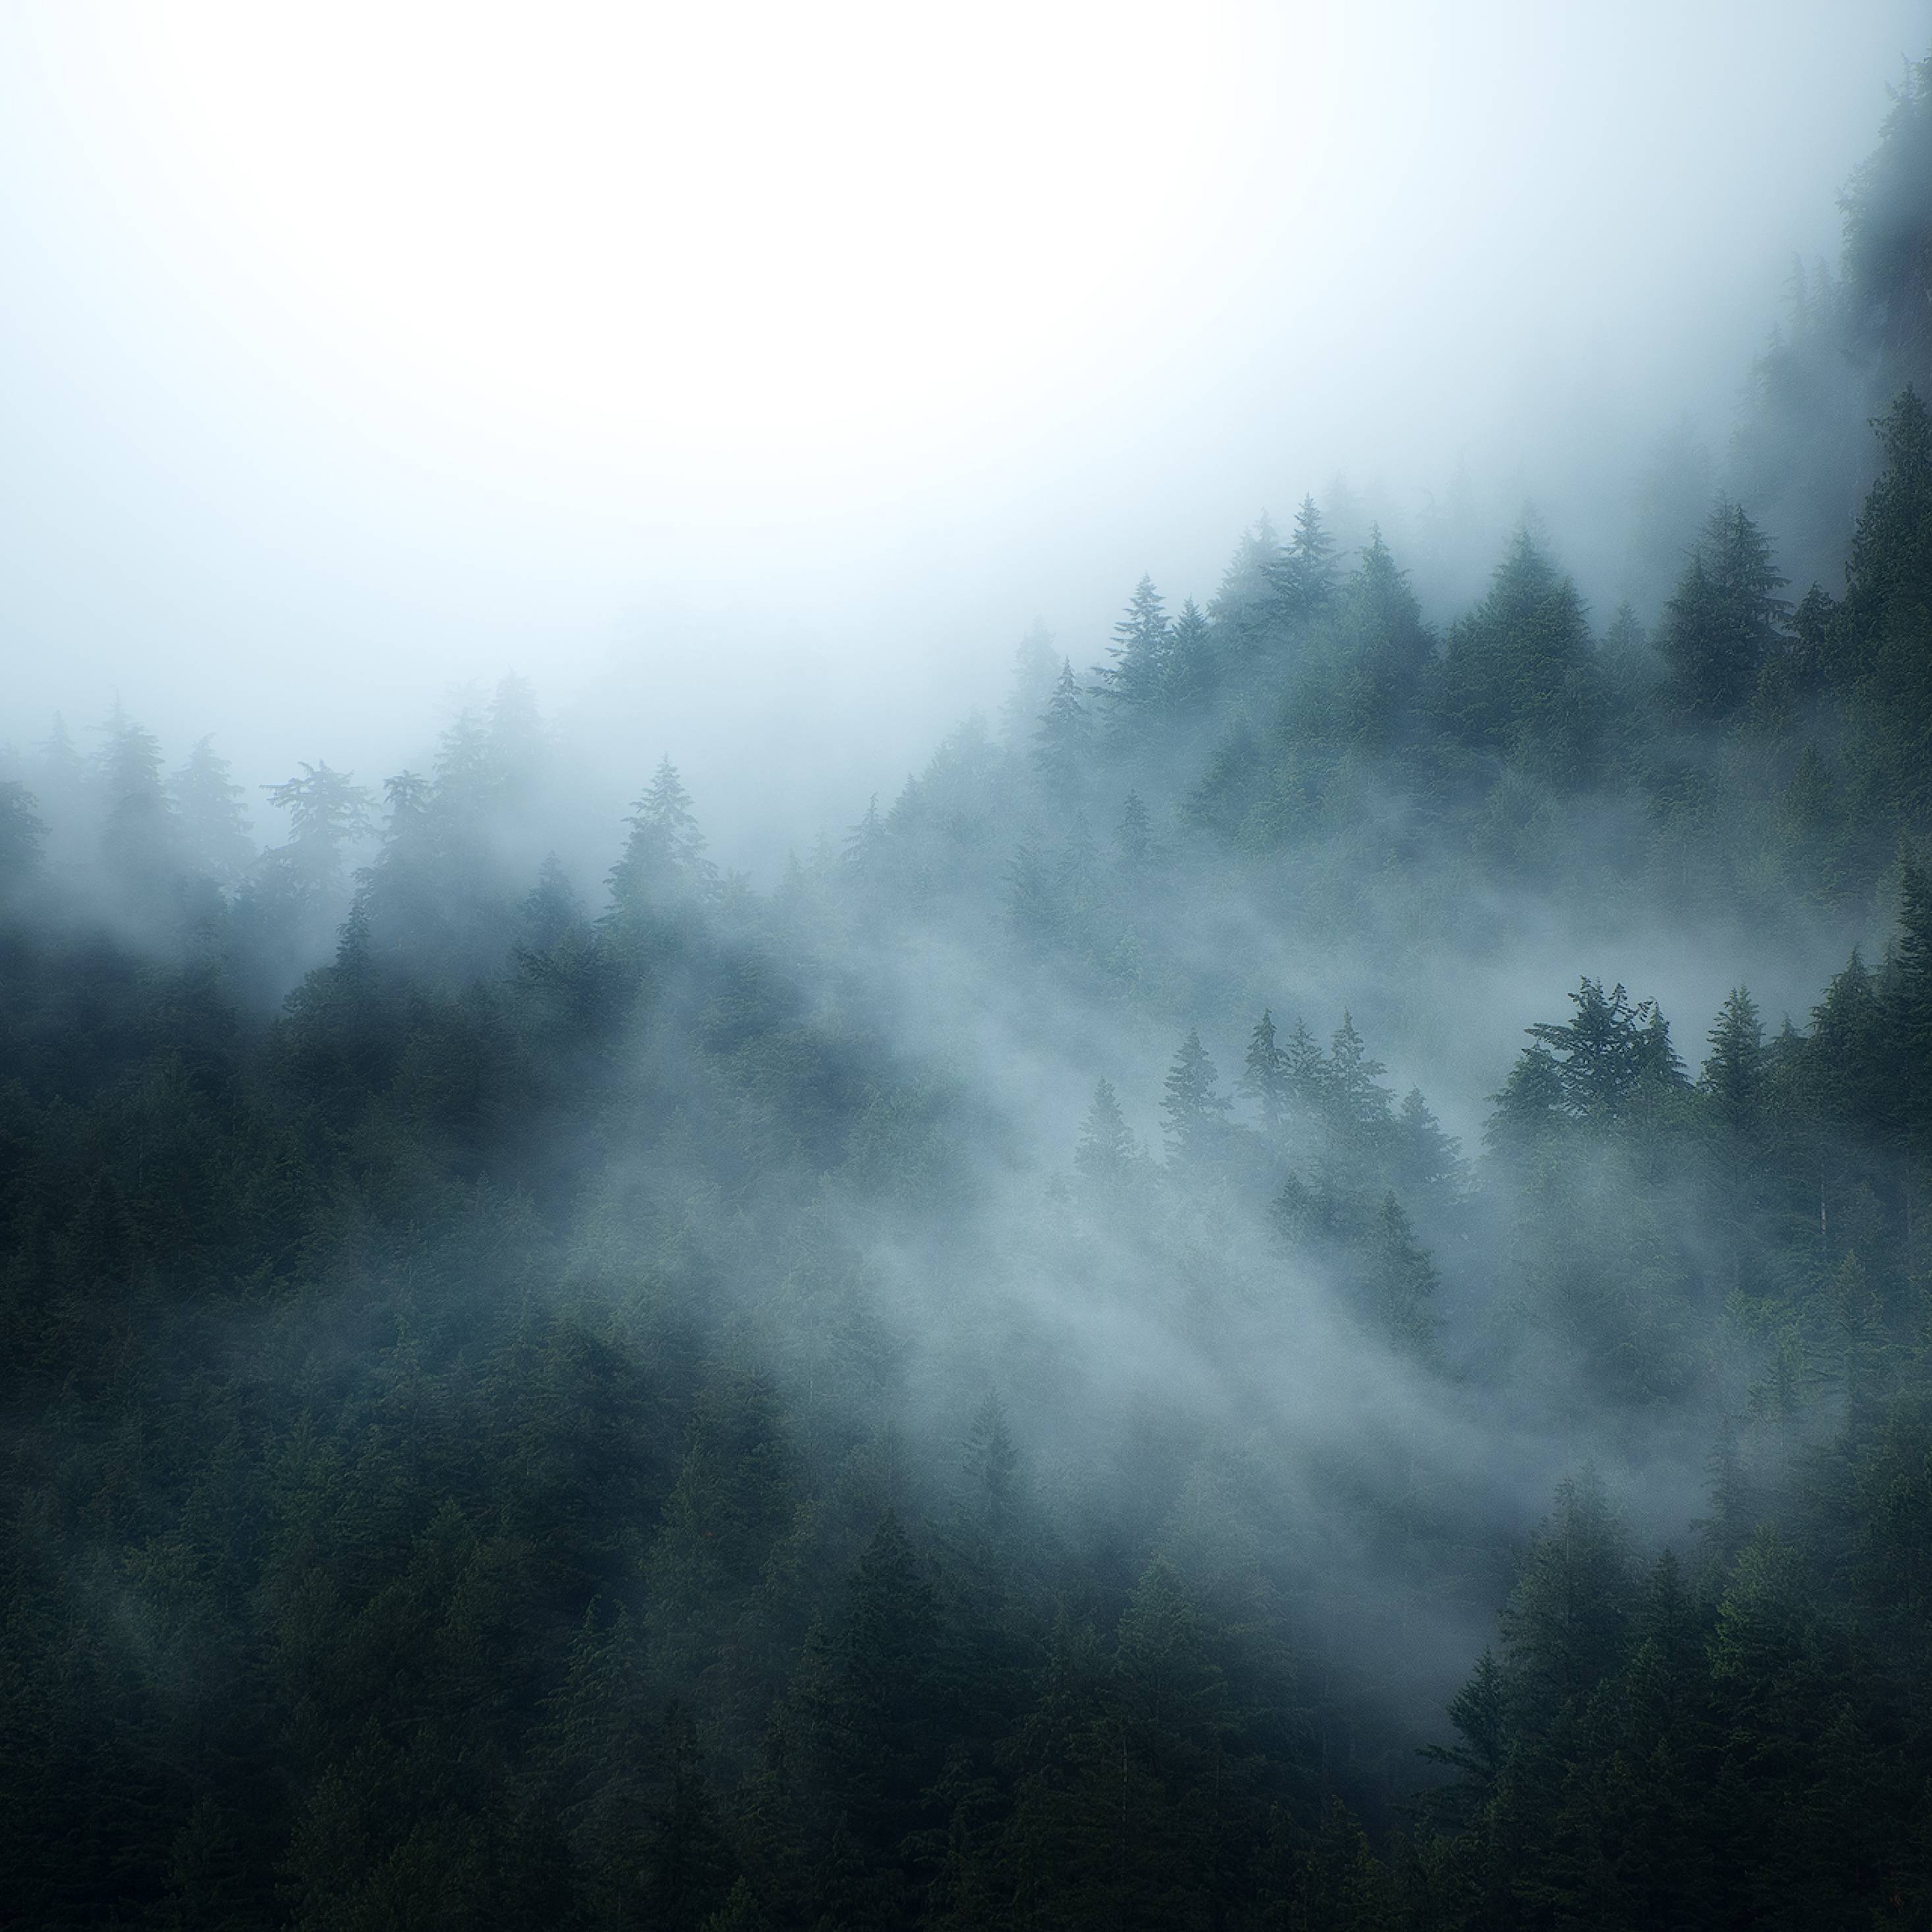 A foggy forest with trees on a hillside. - Foggy forest, fog